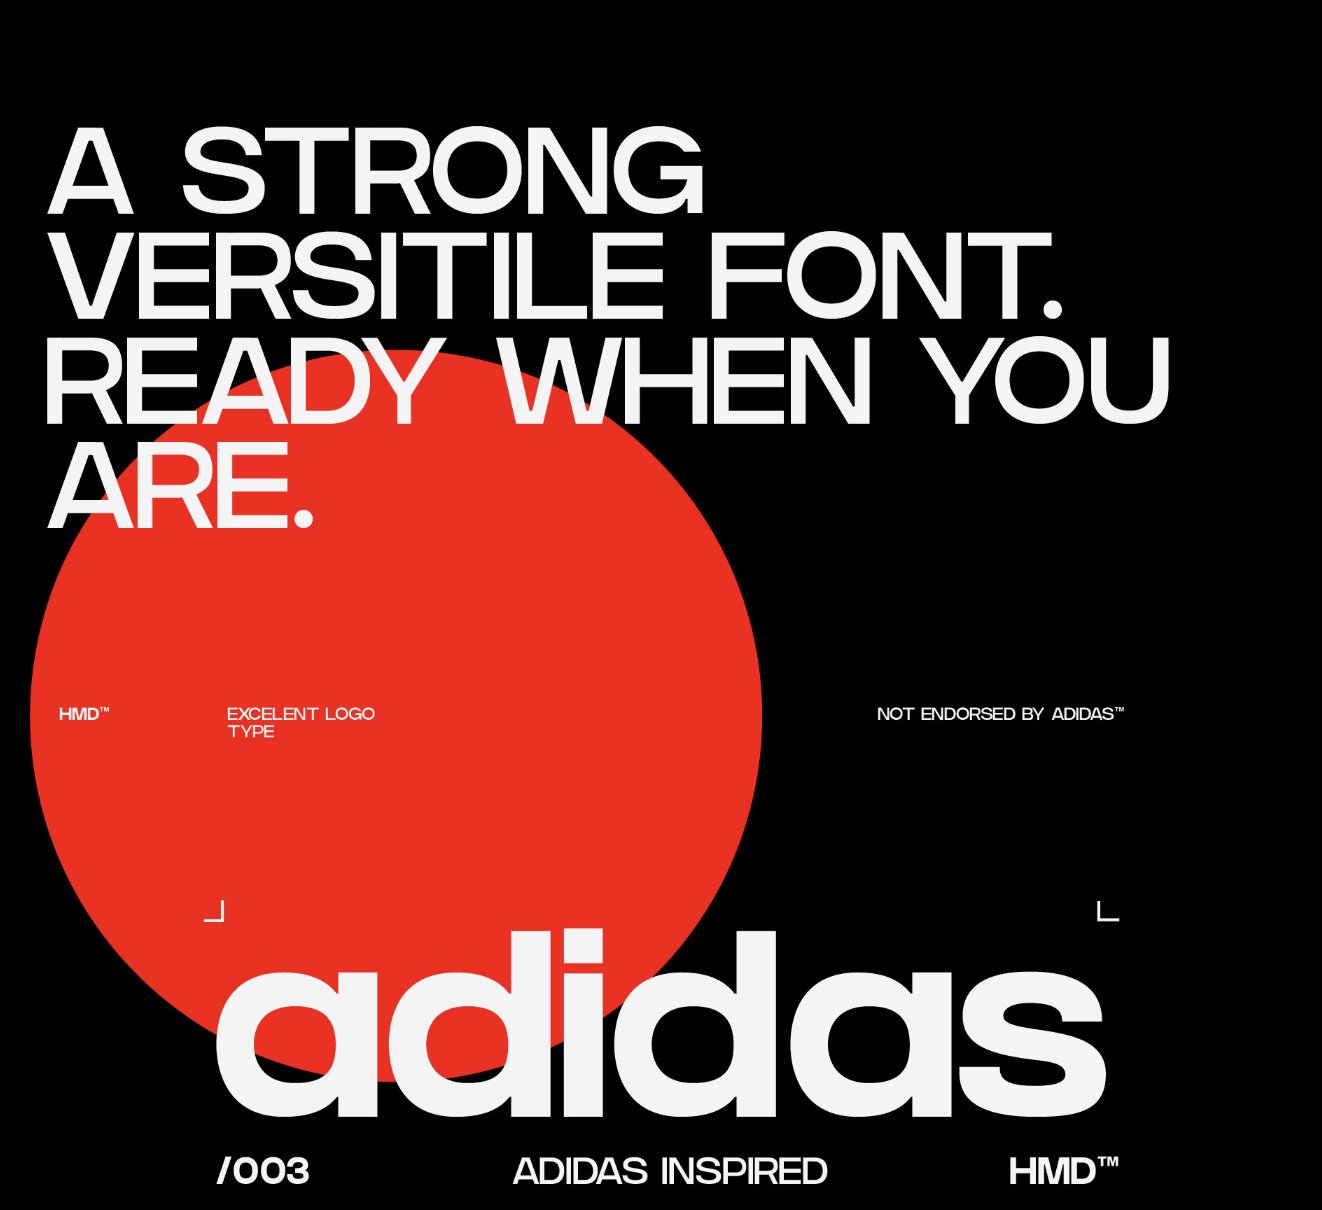 CSS-Tricks on Twitter: "Fontwatch ☕ ︎• Grifter, "an all round versatile font" by Adidas Big Shoulders Display, condensed Gothic, free on Fonts https://t.co/lsP7G3FKkG • Cascadia Code, Microsoft's monospace with